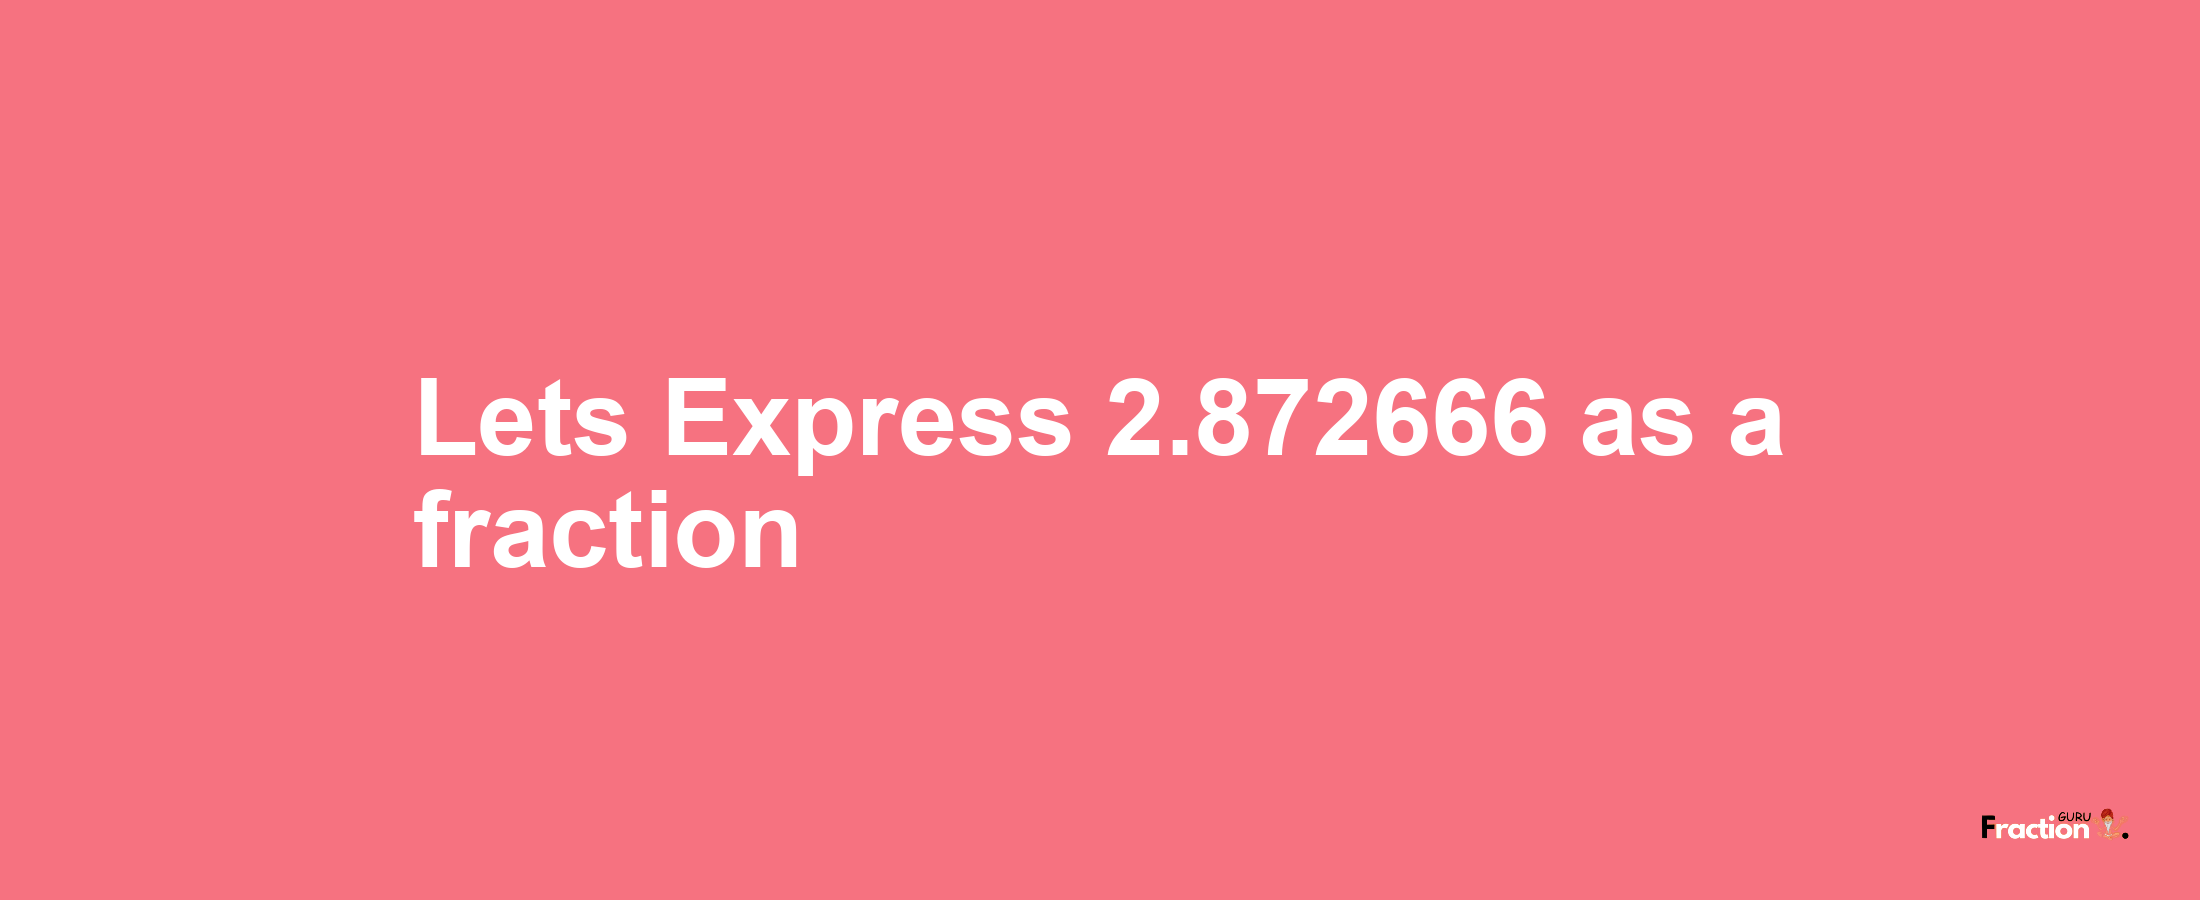 Lets Express 2.872666 as afraction